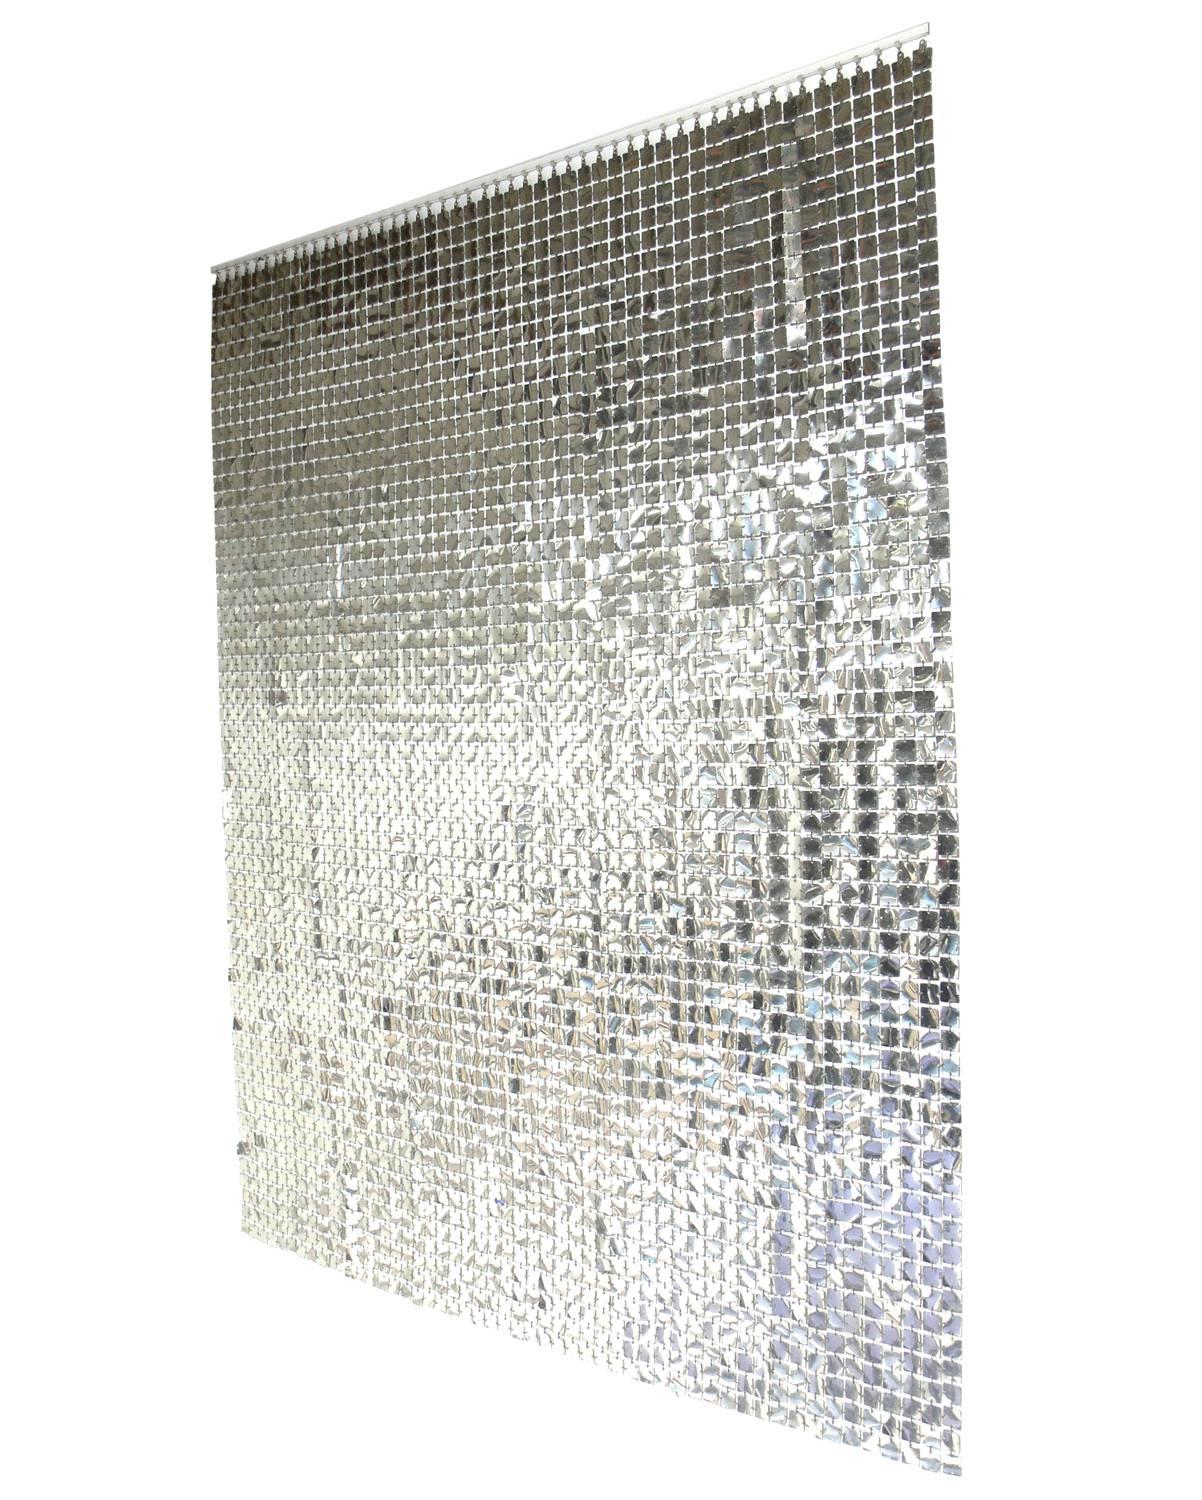 Paco Rabanne space curtain or room divider, French, circa 1970s.